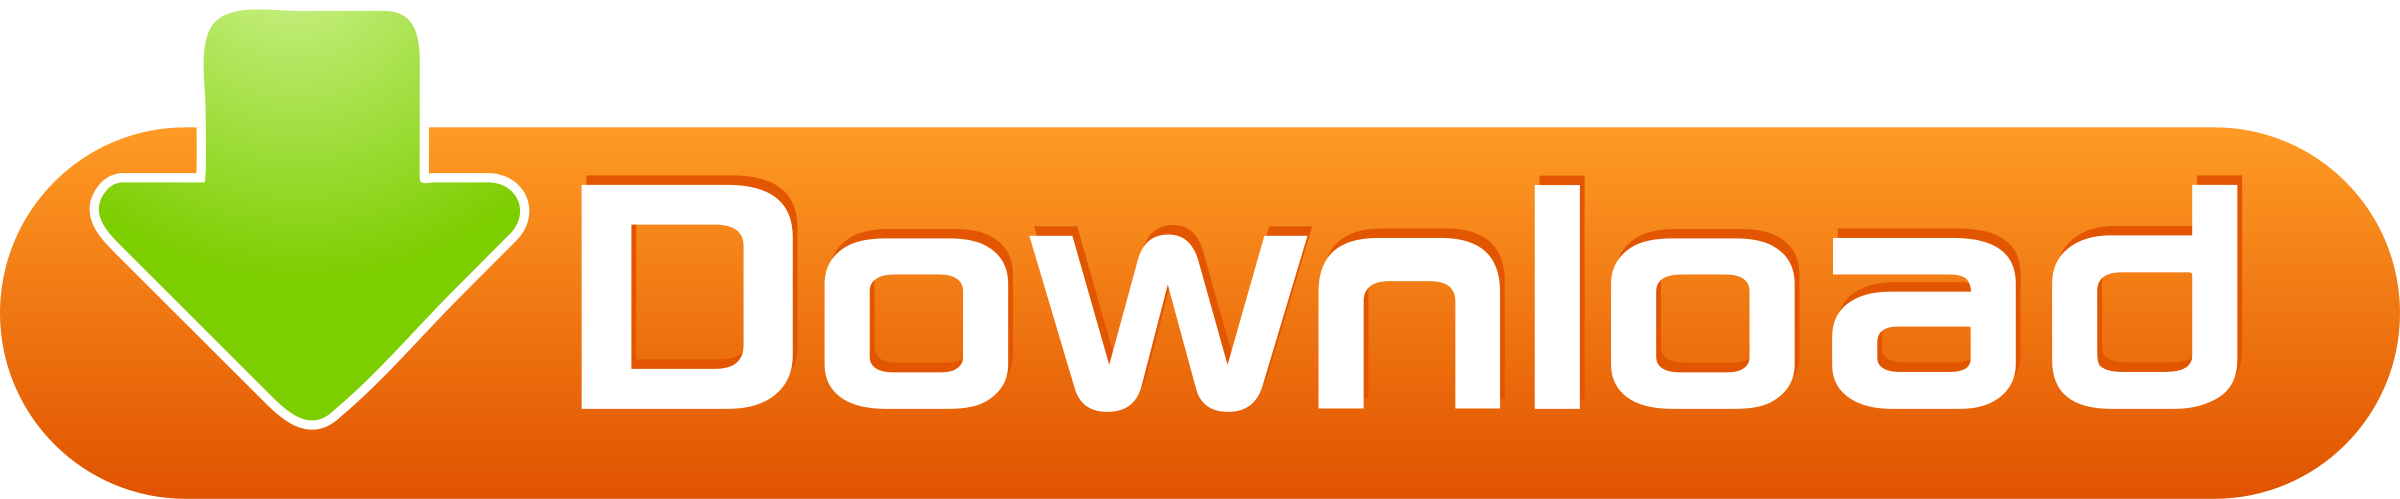 Download Now Button Orange PNG Image